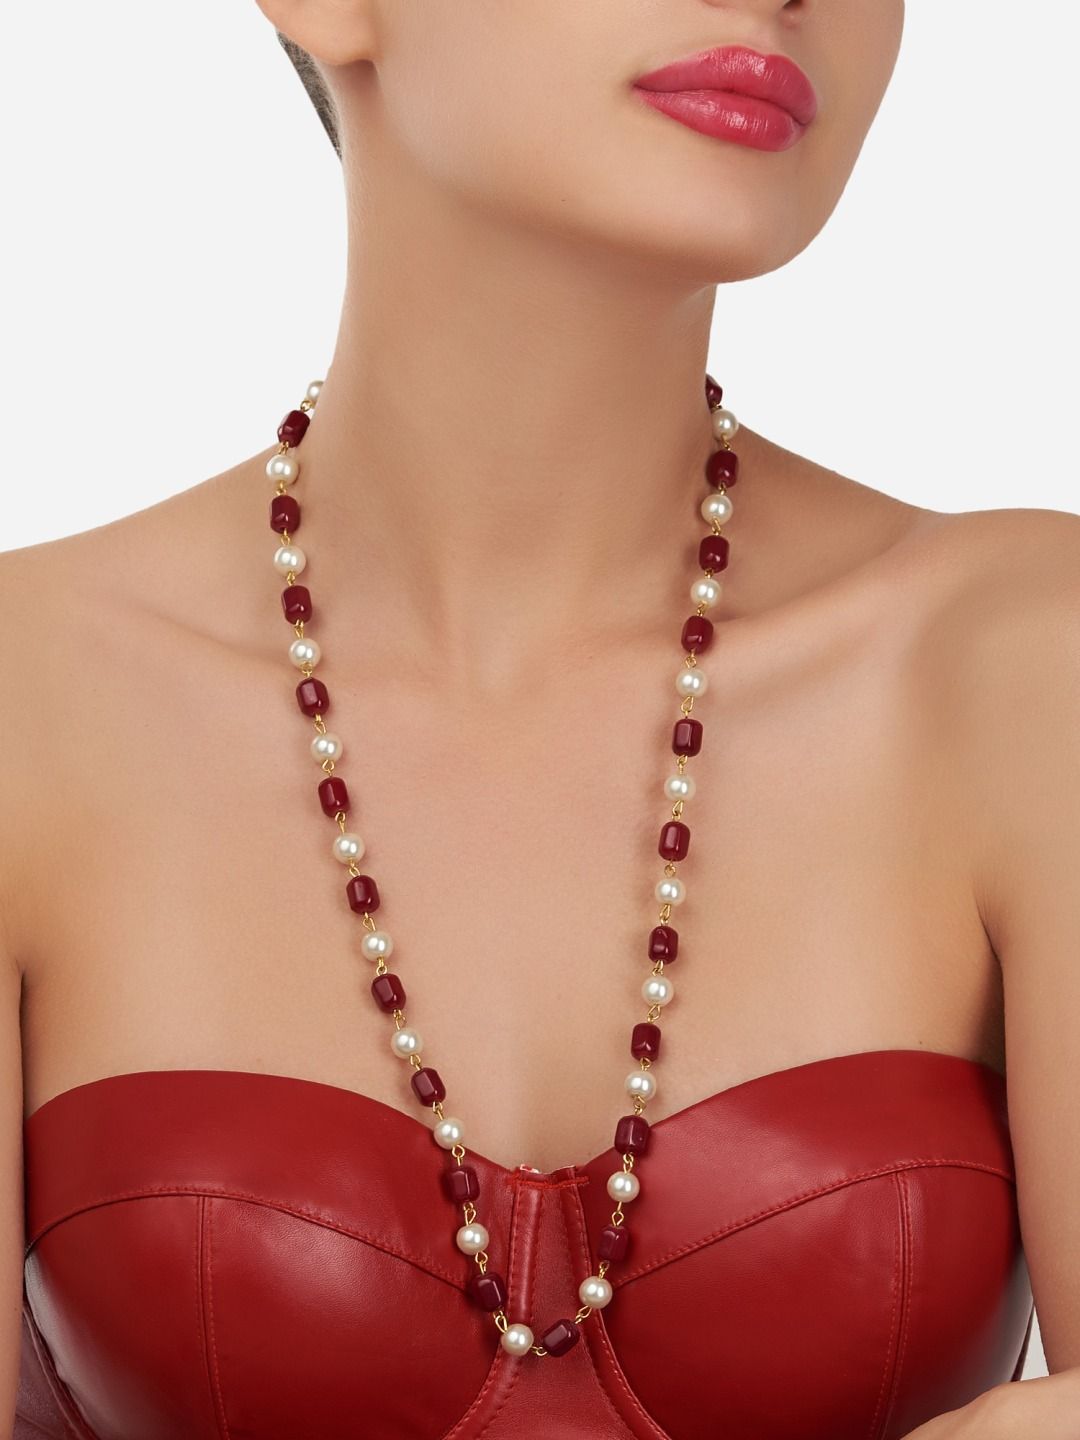 Zaveri Pearls Gold-Toned & Maroon Gold-Plated Beads Embellished Long Necklace Price in India